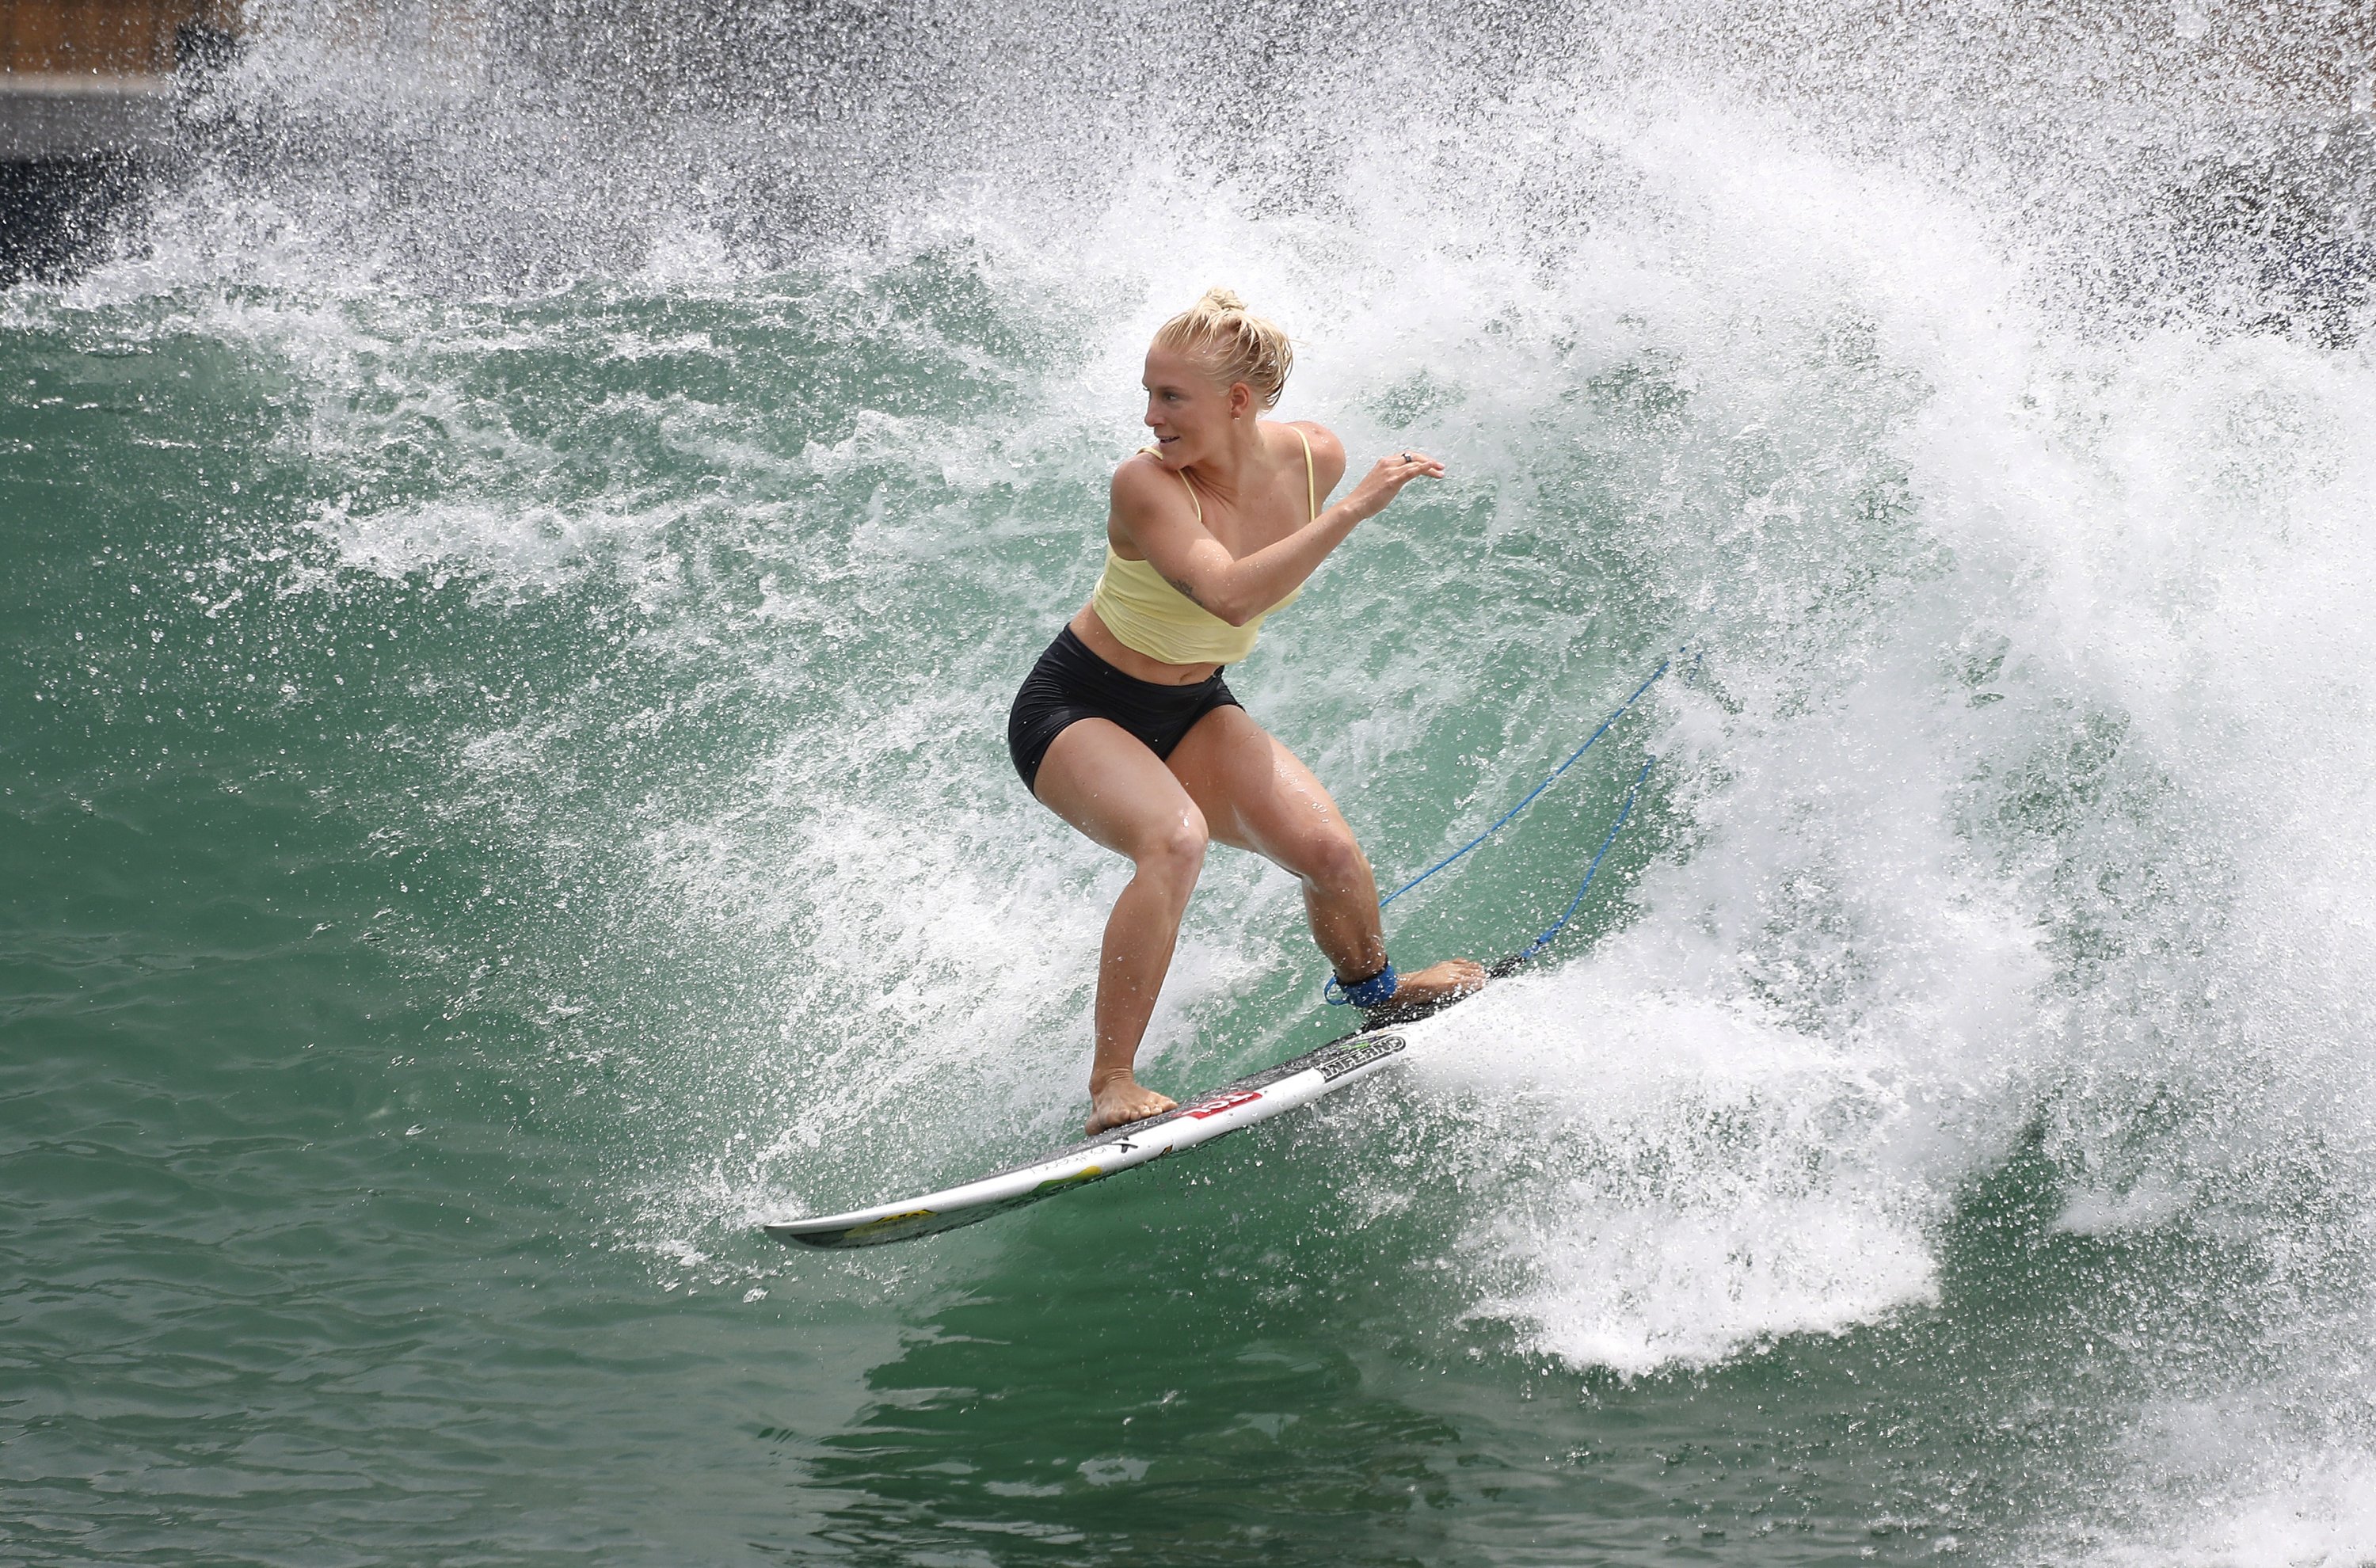 U.S. Surfer Tatiana Weston-Webb works out on a Surf Ranch wave during practice rounds for the upcoming Olympics, in Lemoore, California, U.S., June 16, 2021. (AP Photo)